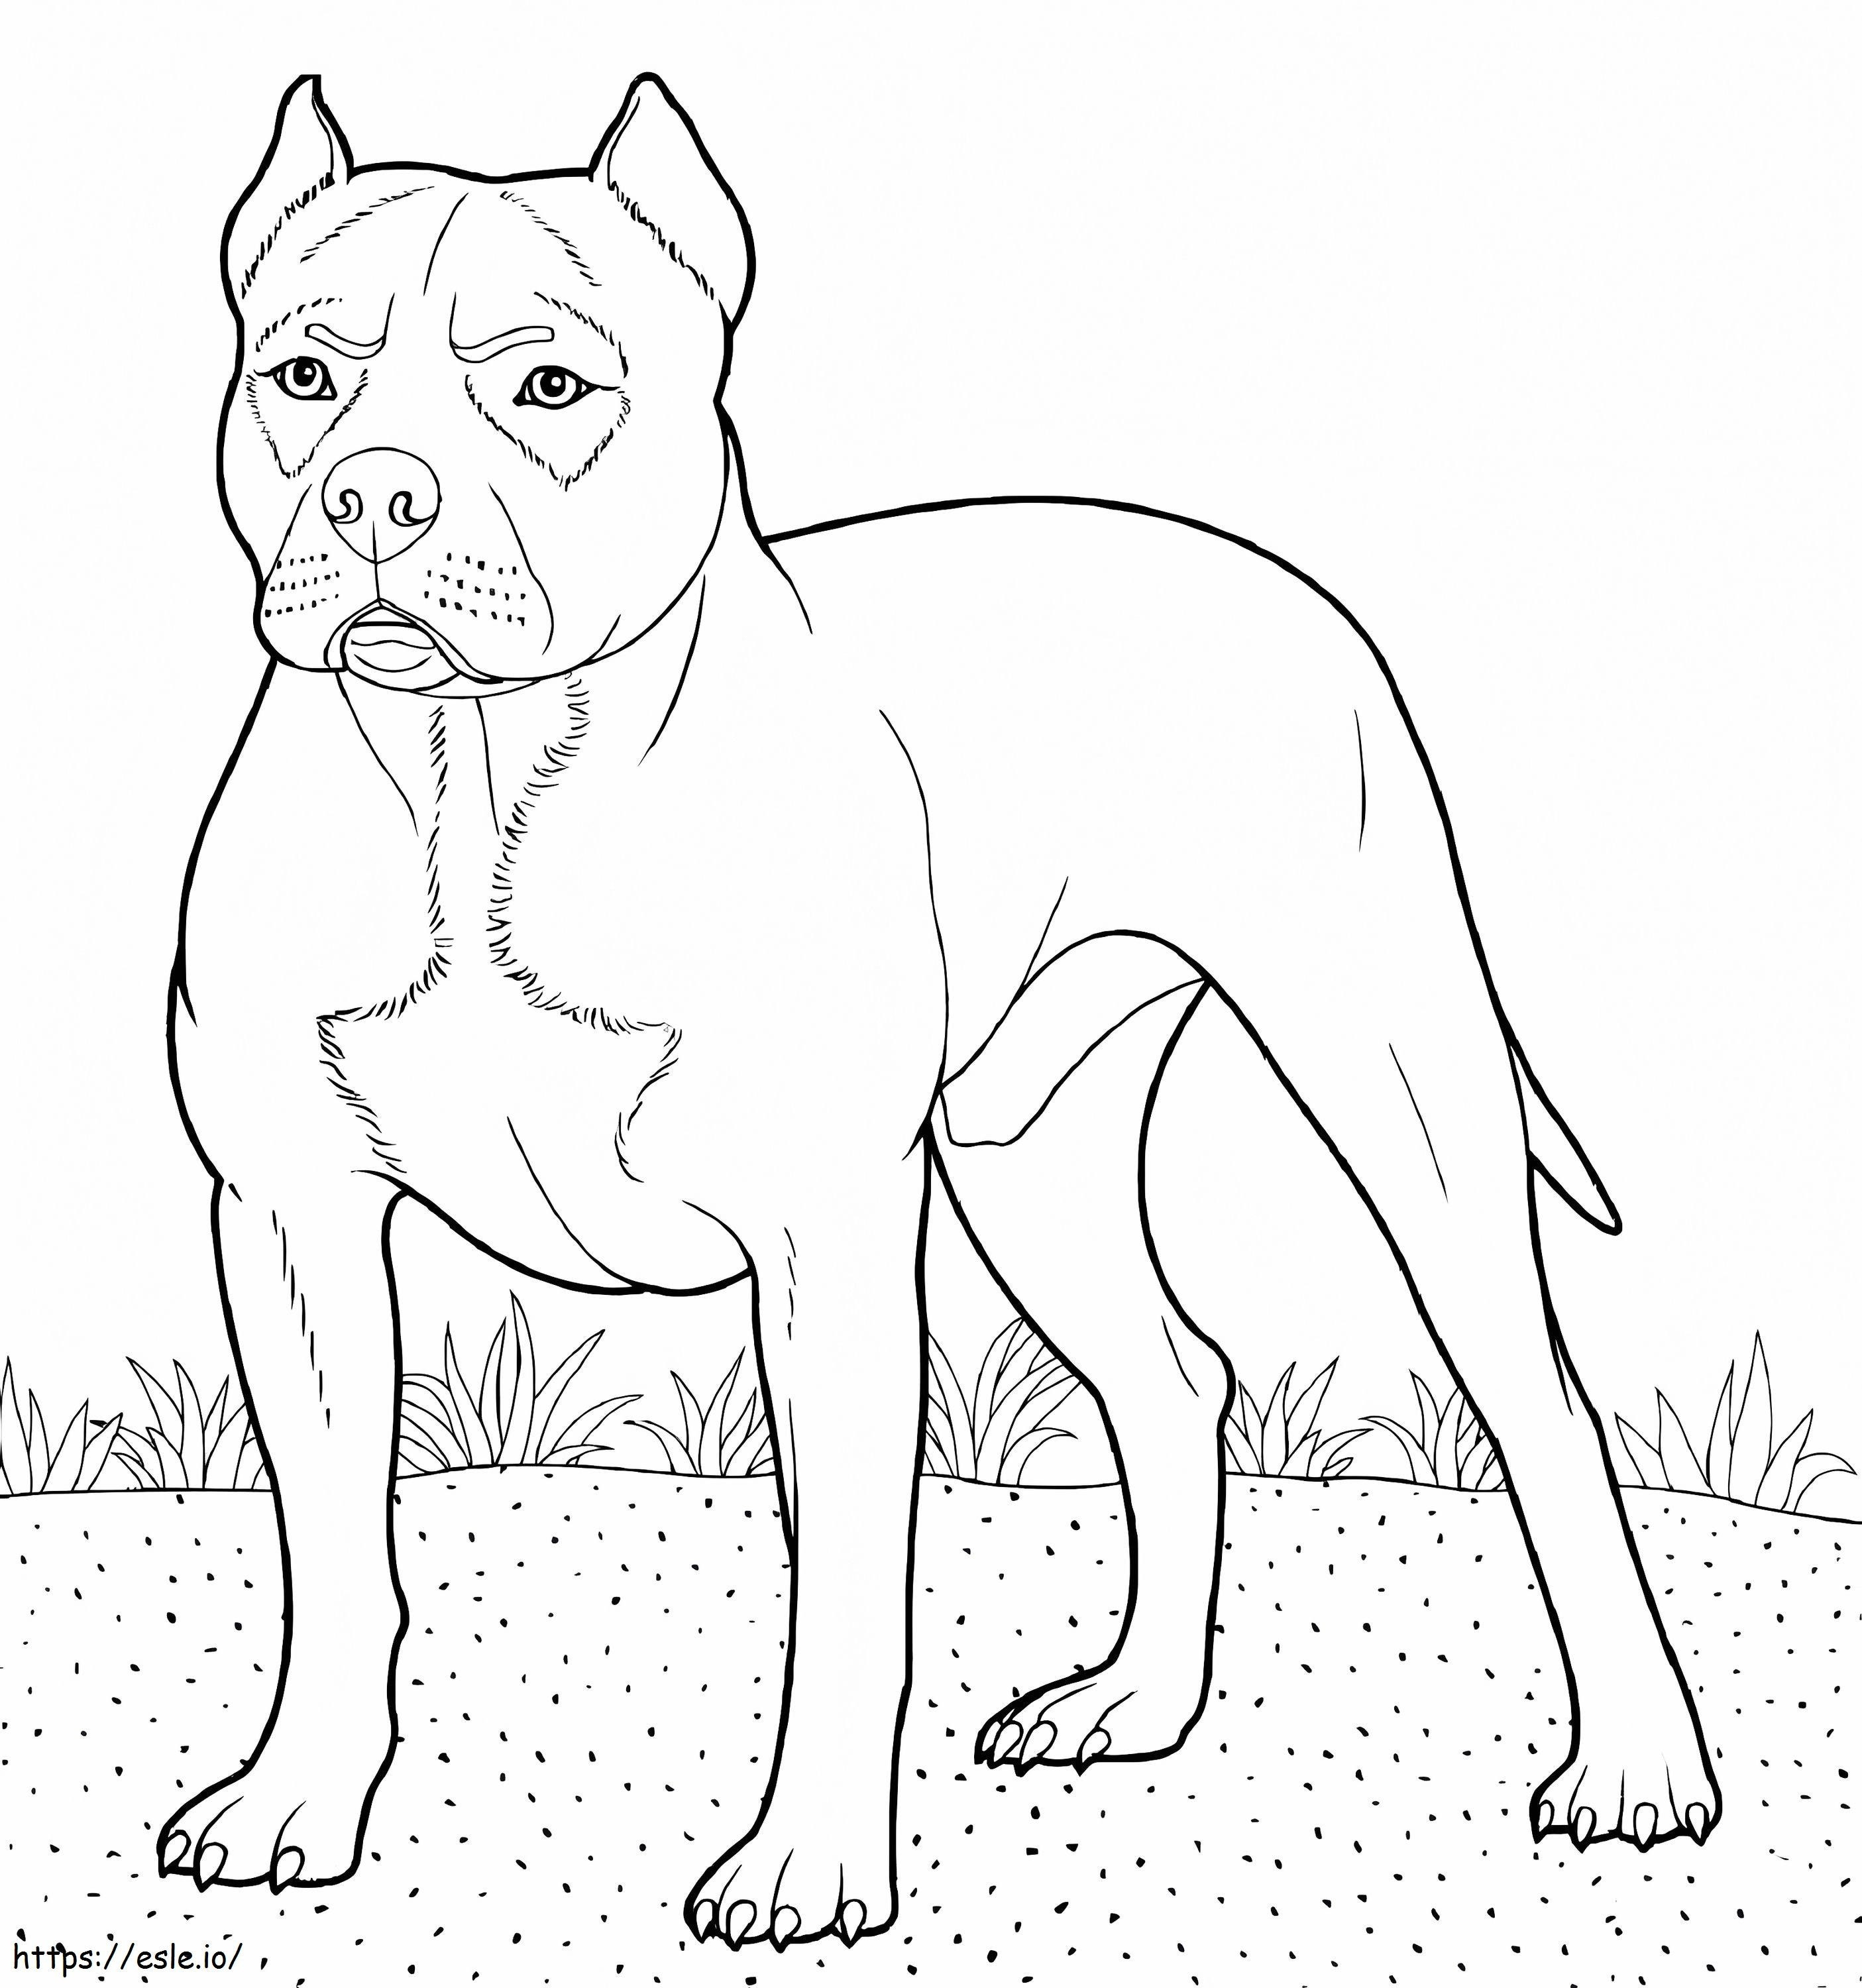 To Pitbull coloring page